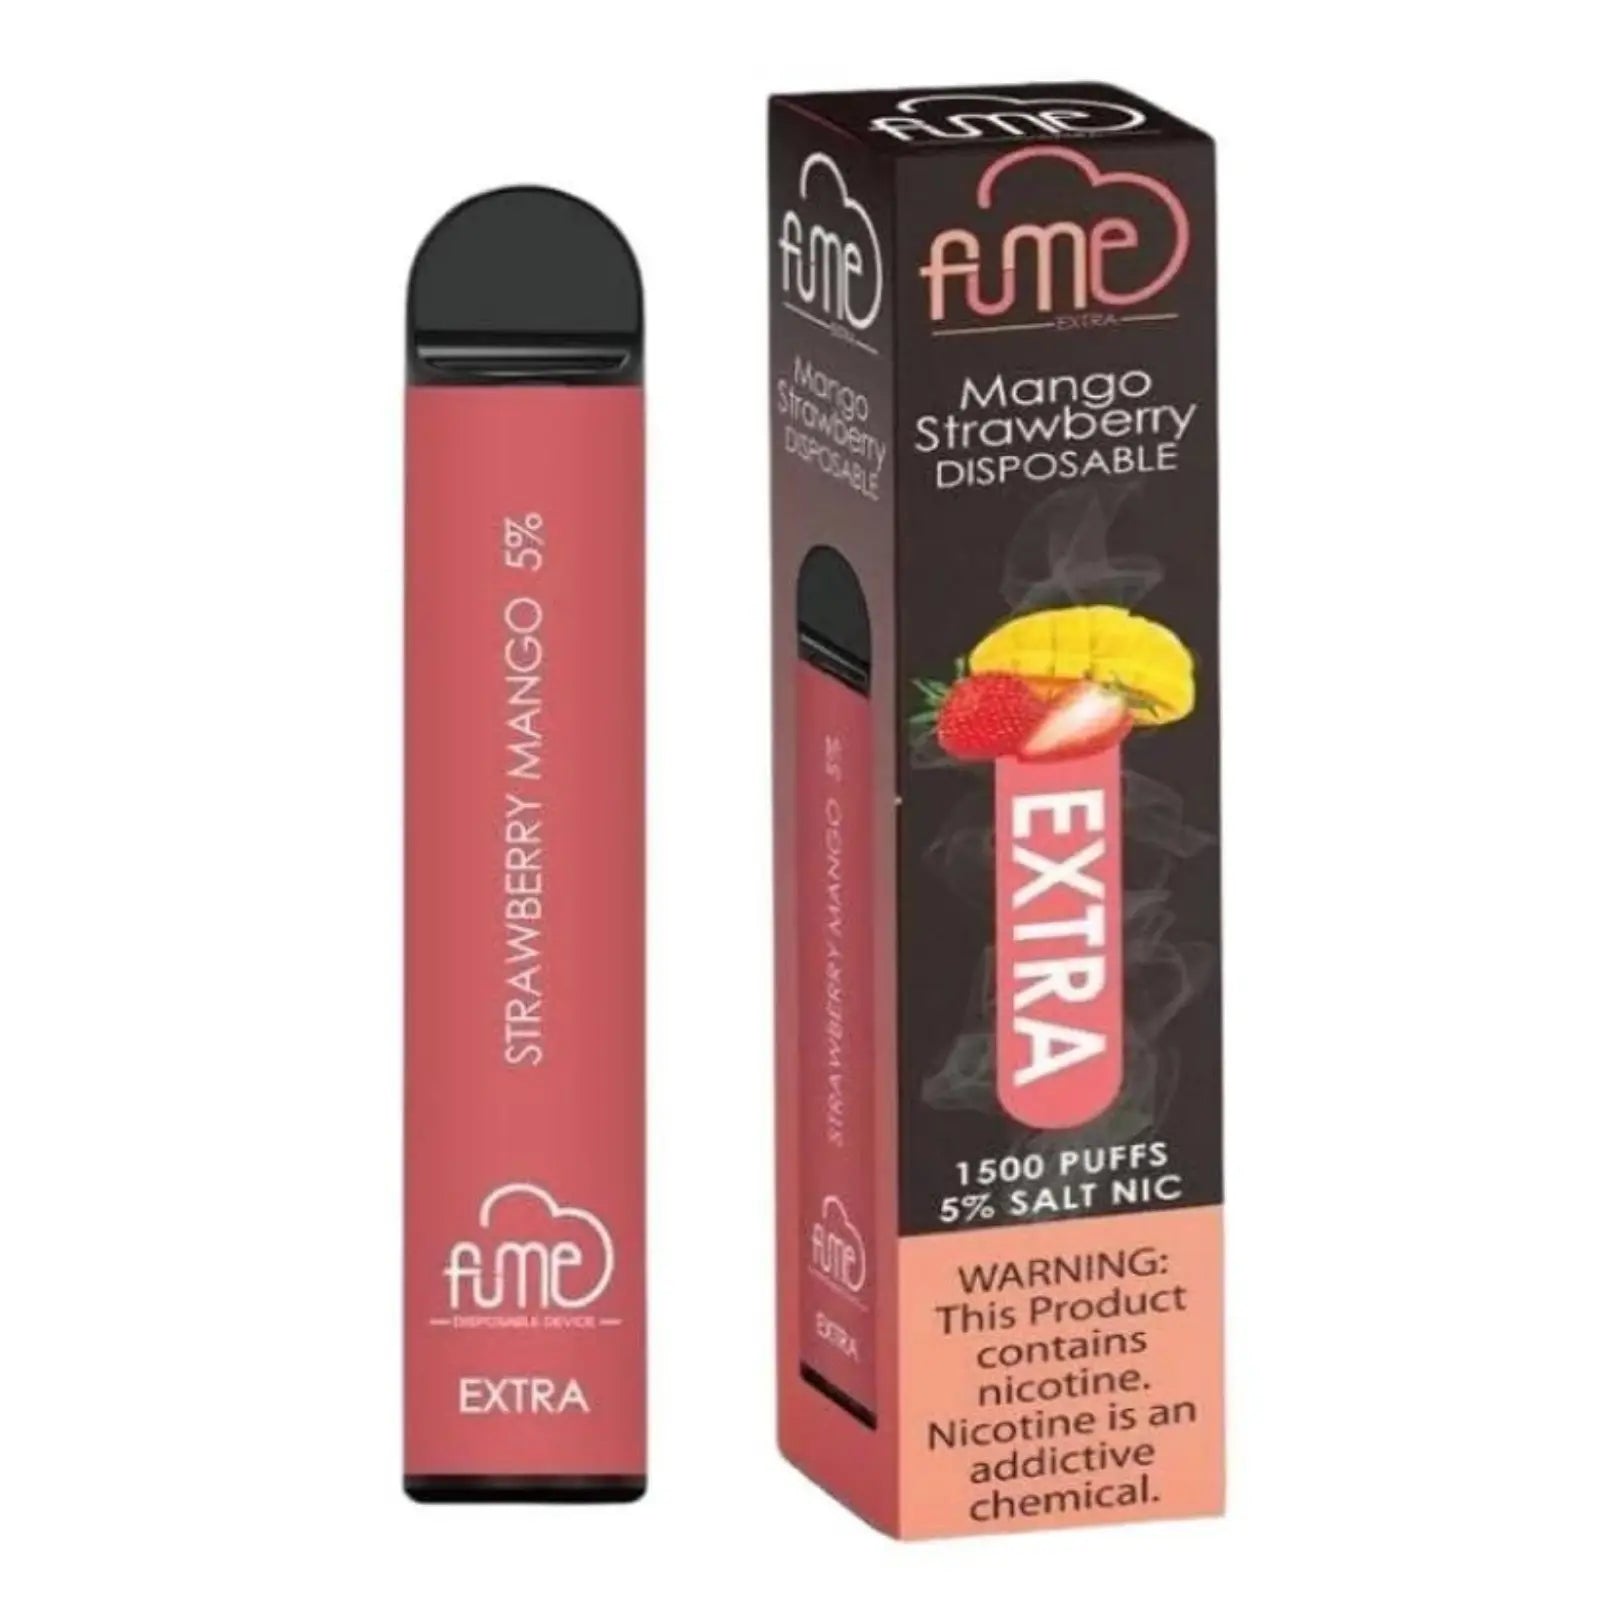 Fume Extra Disposable 1500 Puffs - Strawberry Mango